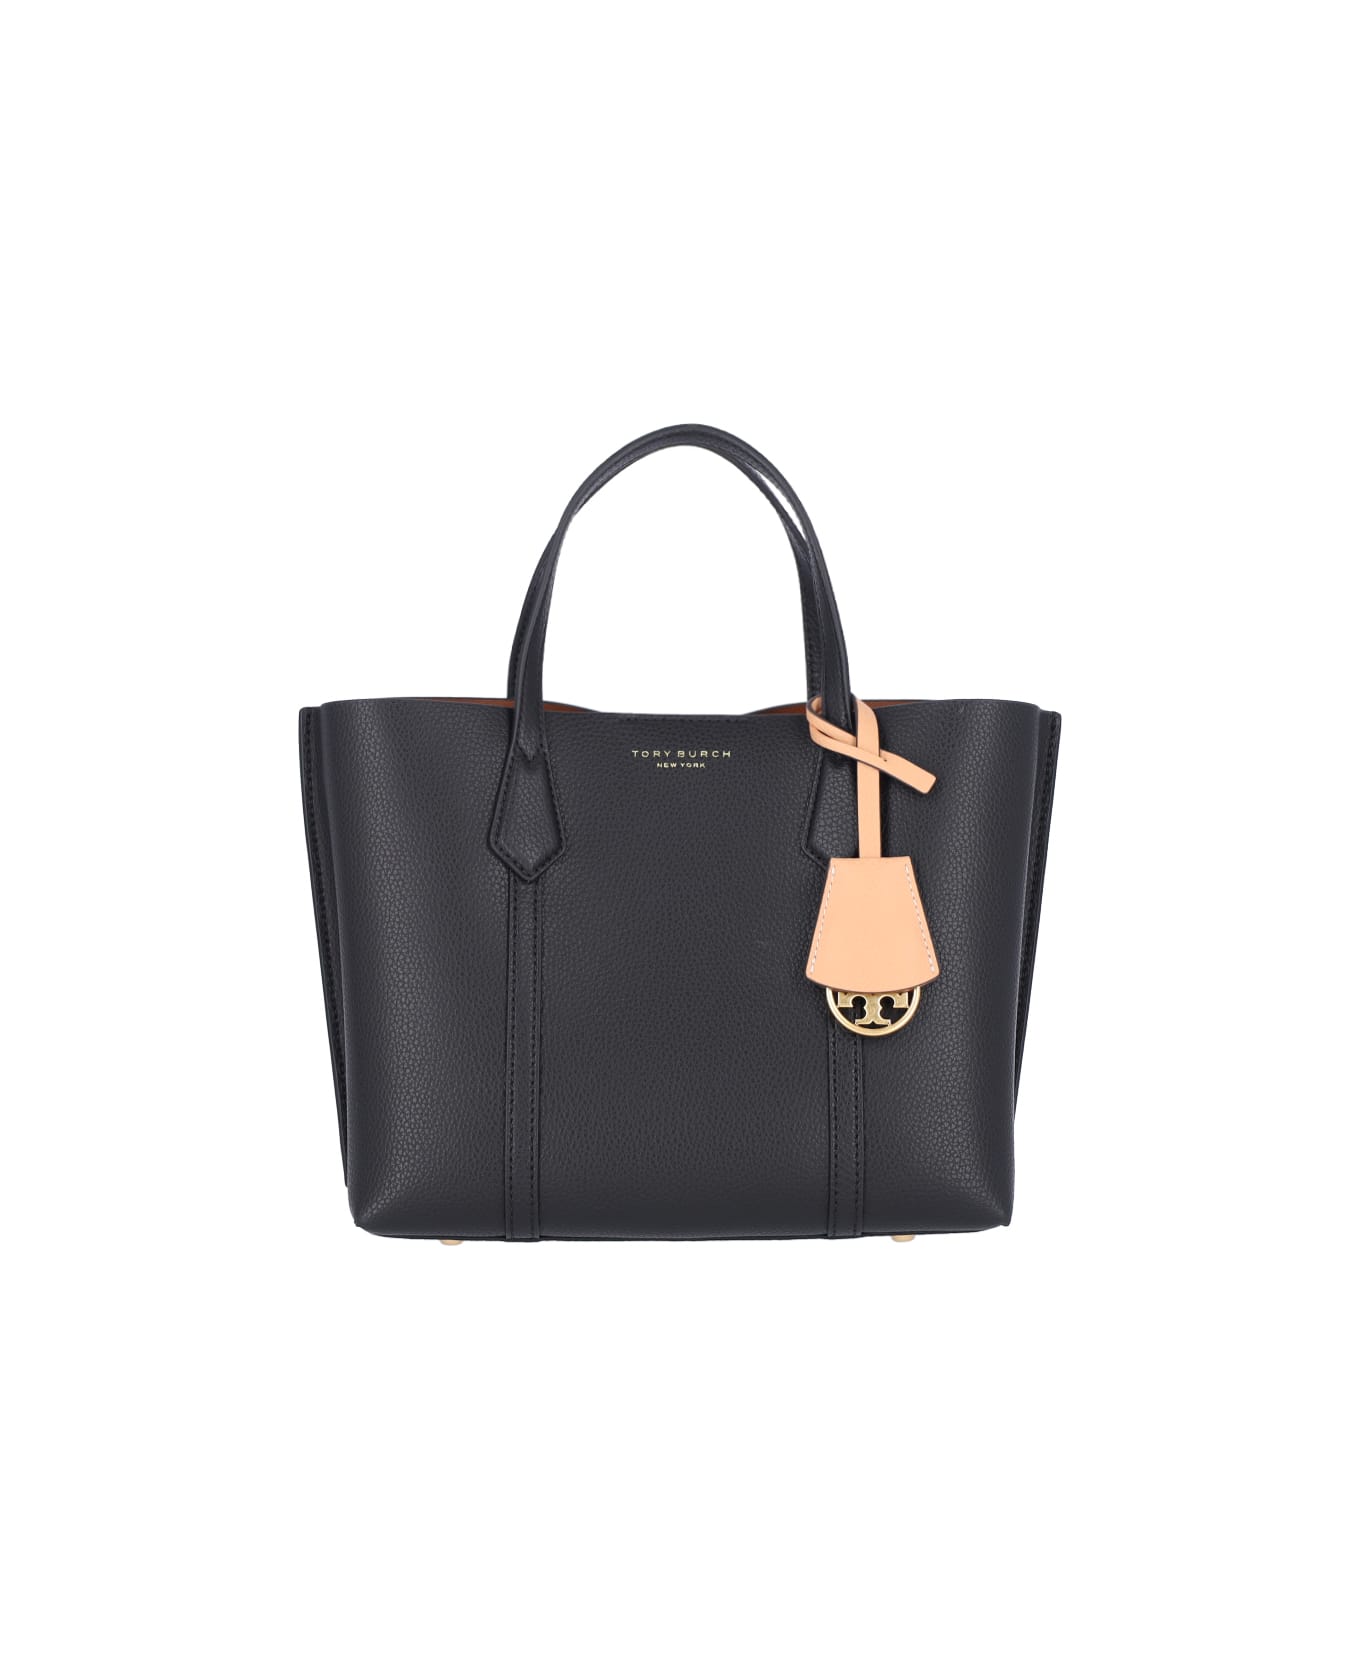 Tory Burch 'perry' Small Tote Bag - Black  